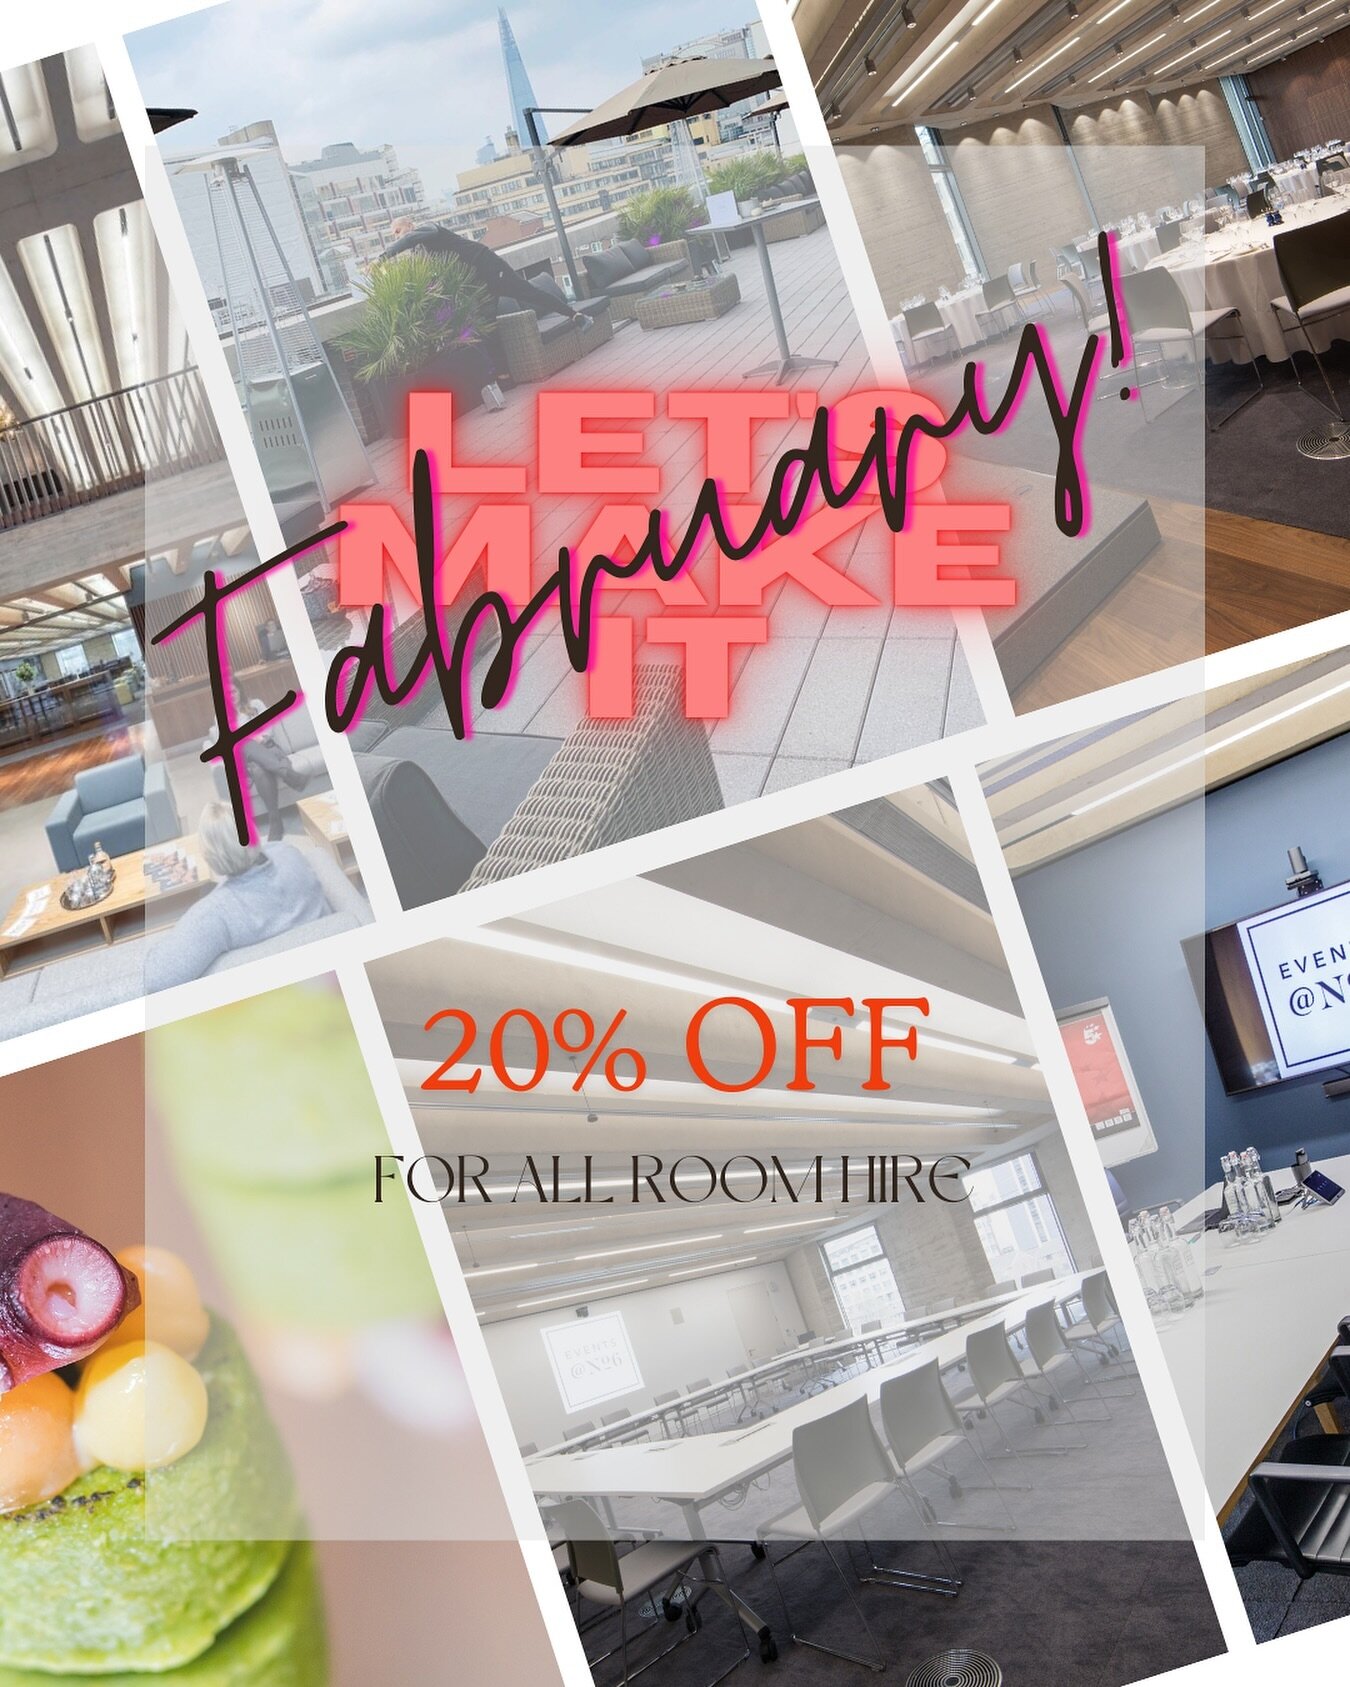 ✨ Next month, Let&rsquo;s make it Fab-ruary! ✨

Book your event with us next month and enjoy a 20% discount on room hire. Plus, warm up with our exclusive catering packages - opt for one, and we&rsquo;ll treat you to a rolling tea and coffee to keep 